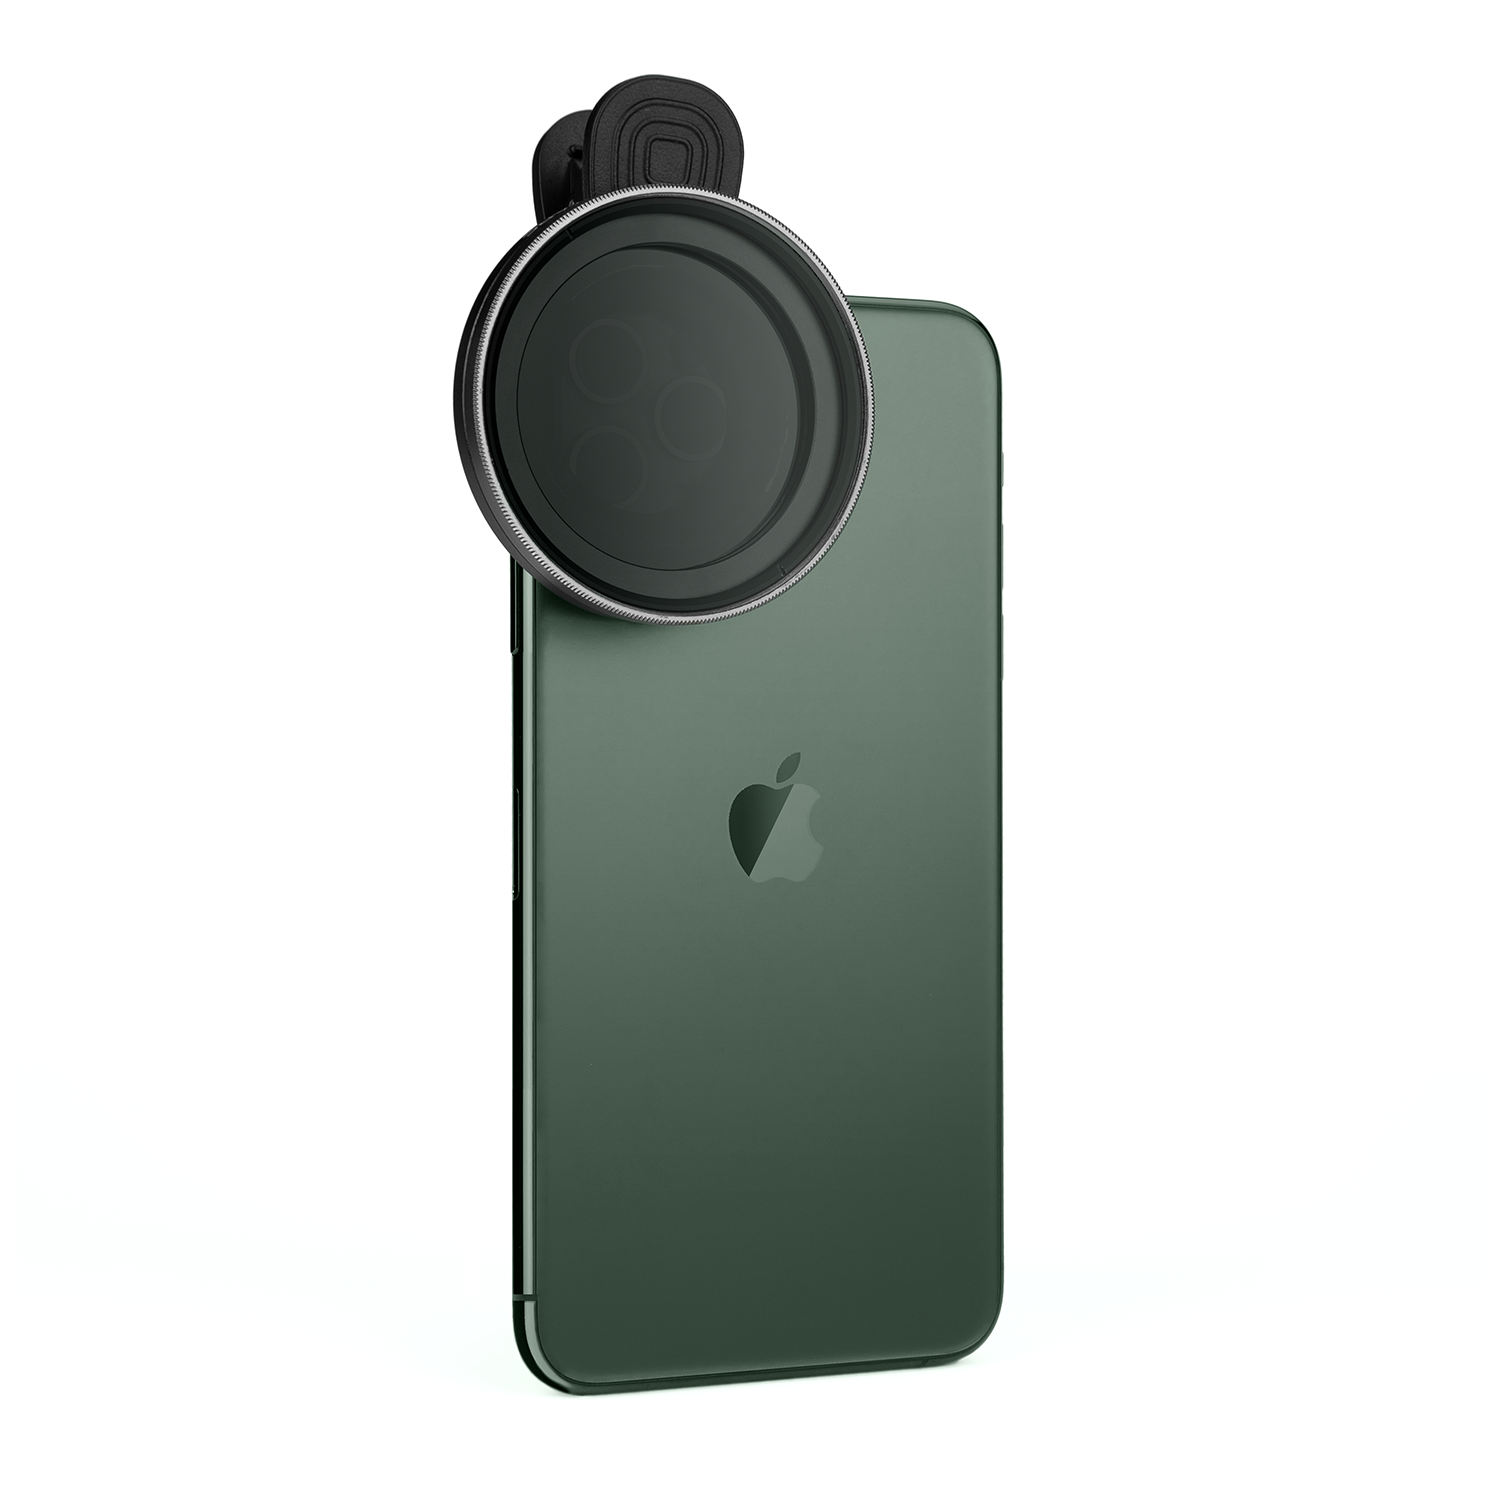 iPhone Variable ND Filter - SANDMARC Motion Filter